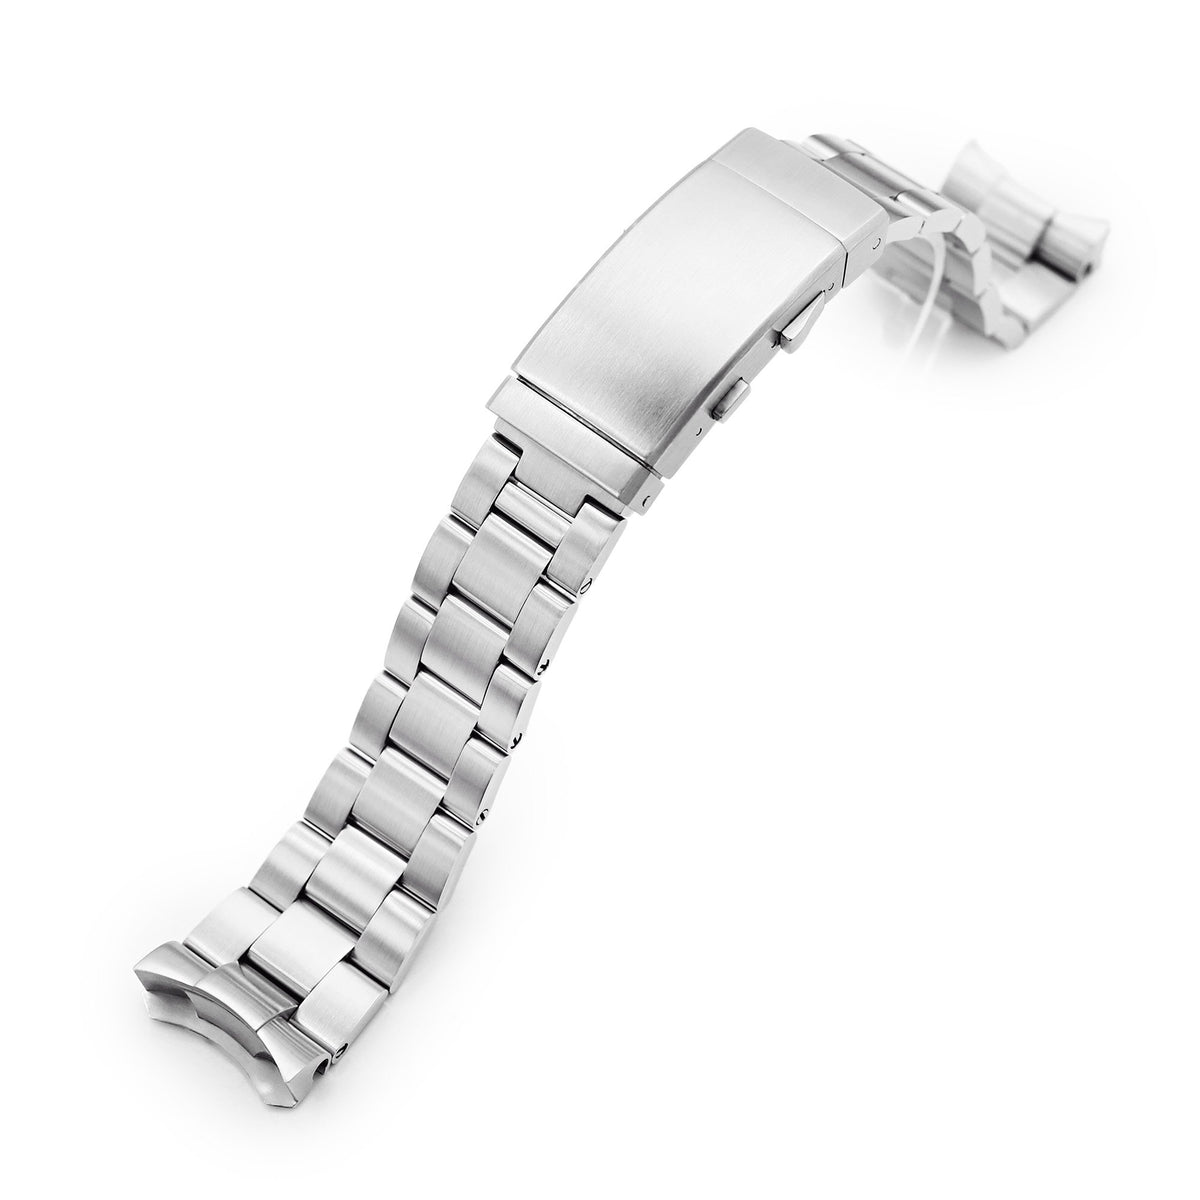 22mm Super-O Boyer 316L Stainless Steel Watch Band for Seiko 5, Brushed Wetsuit Ratchet Buckle Strapcode Watch Bands